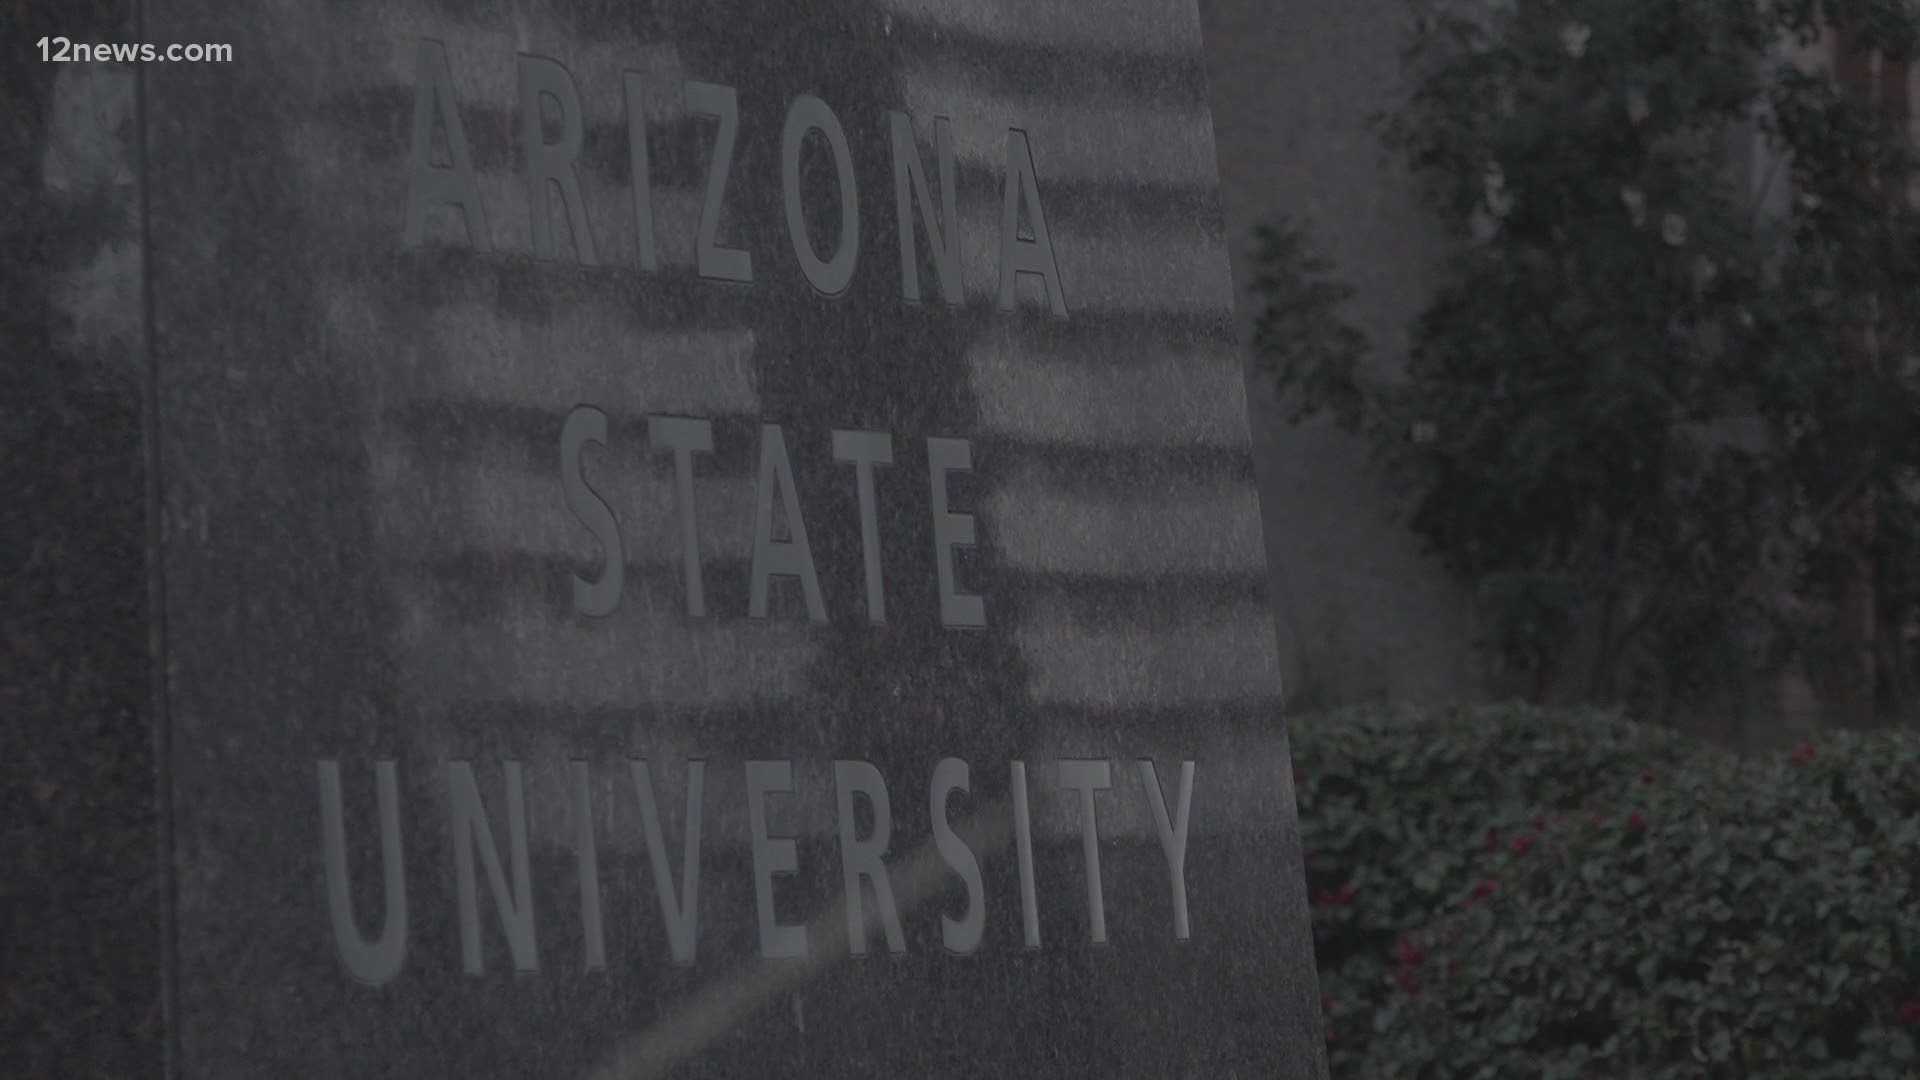 Less than one week after students moved into the dorms at ASU, police have began investigating a sex assault. The suspect description is vague.